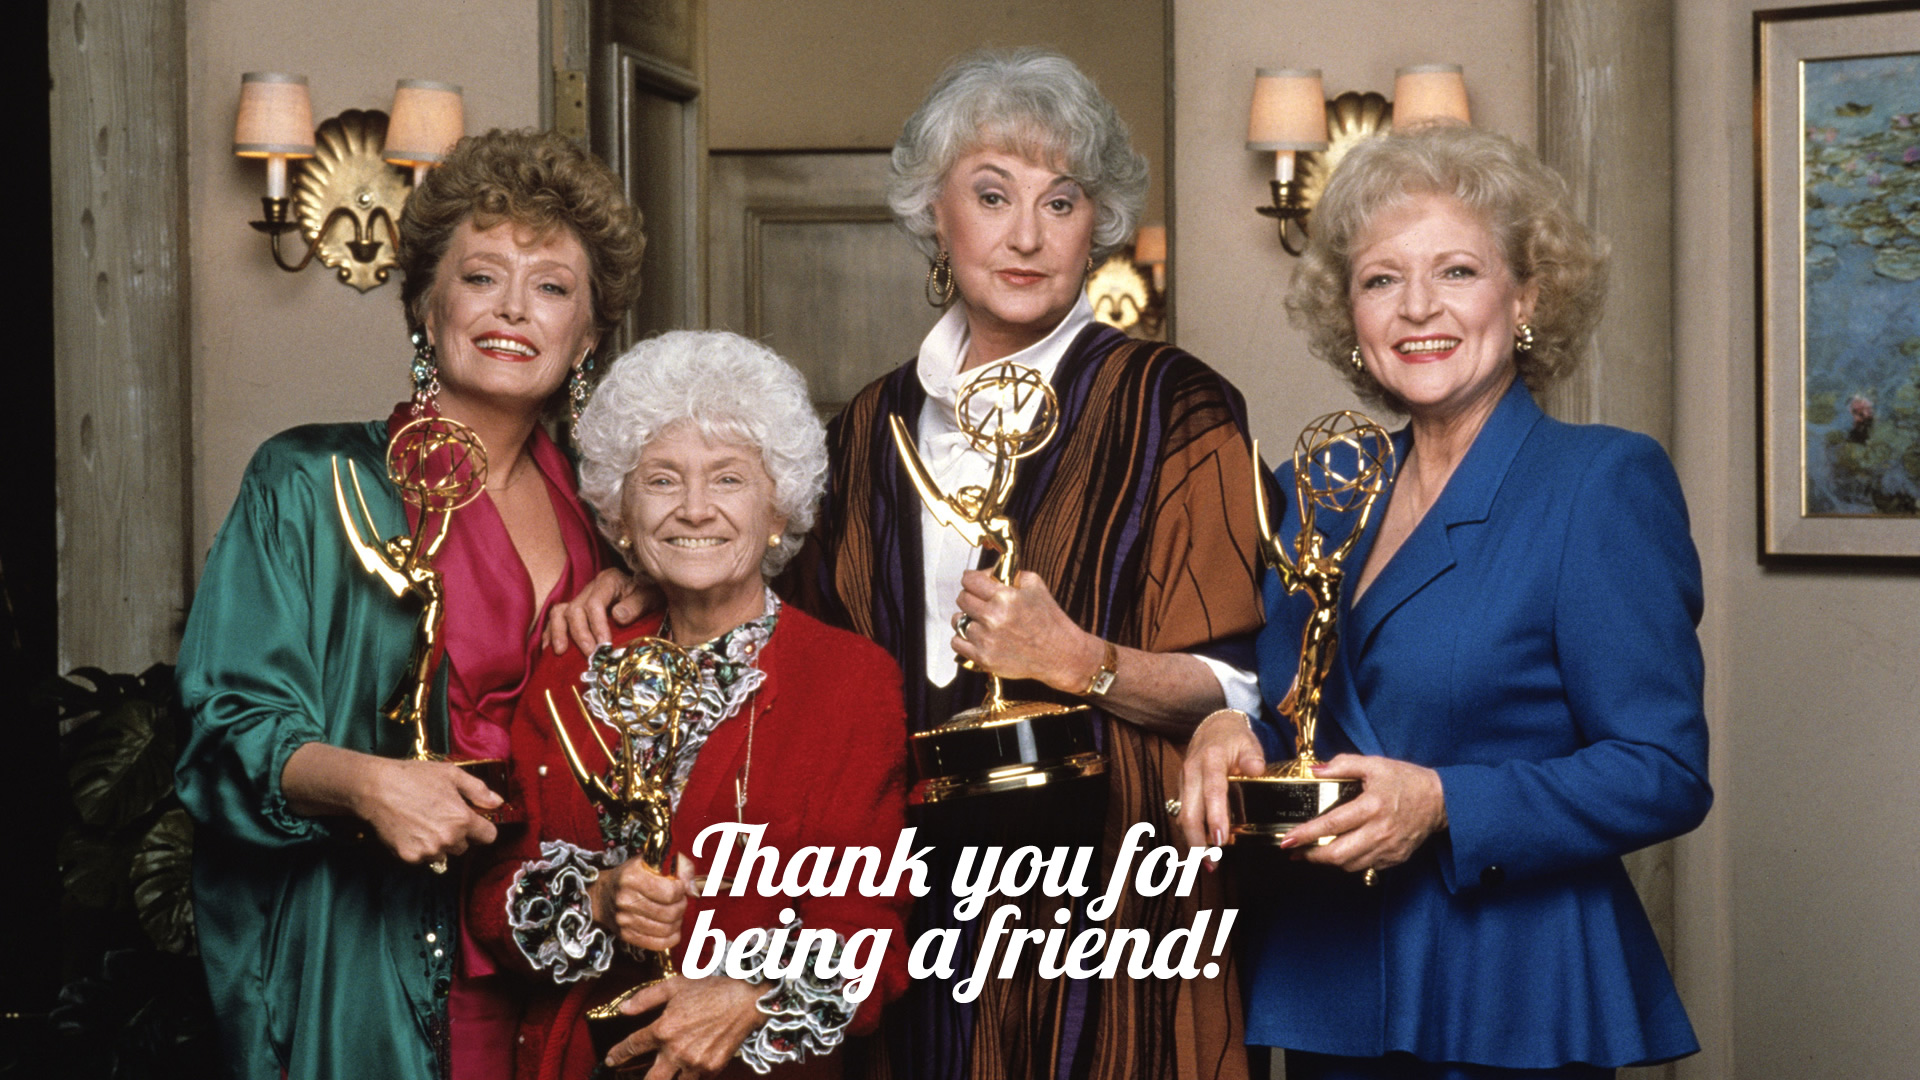 Free download The Golden Girls Cast with Awards HD Wallpaper FullHDWpp